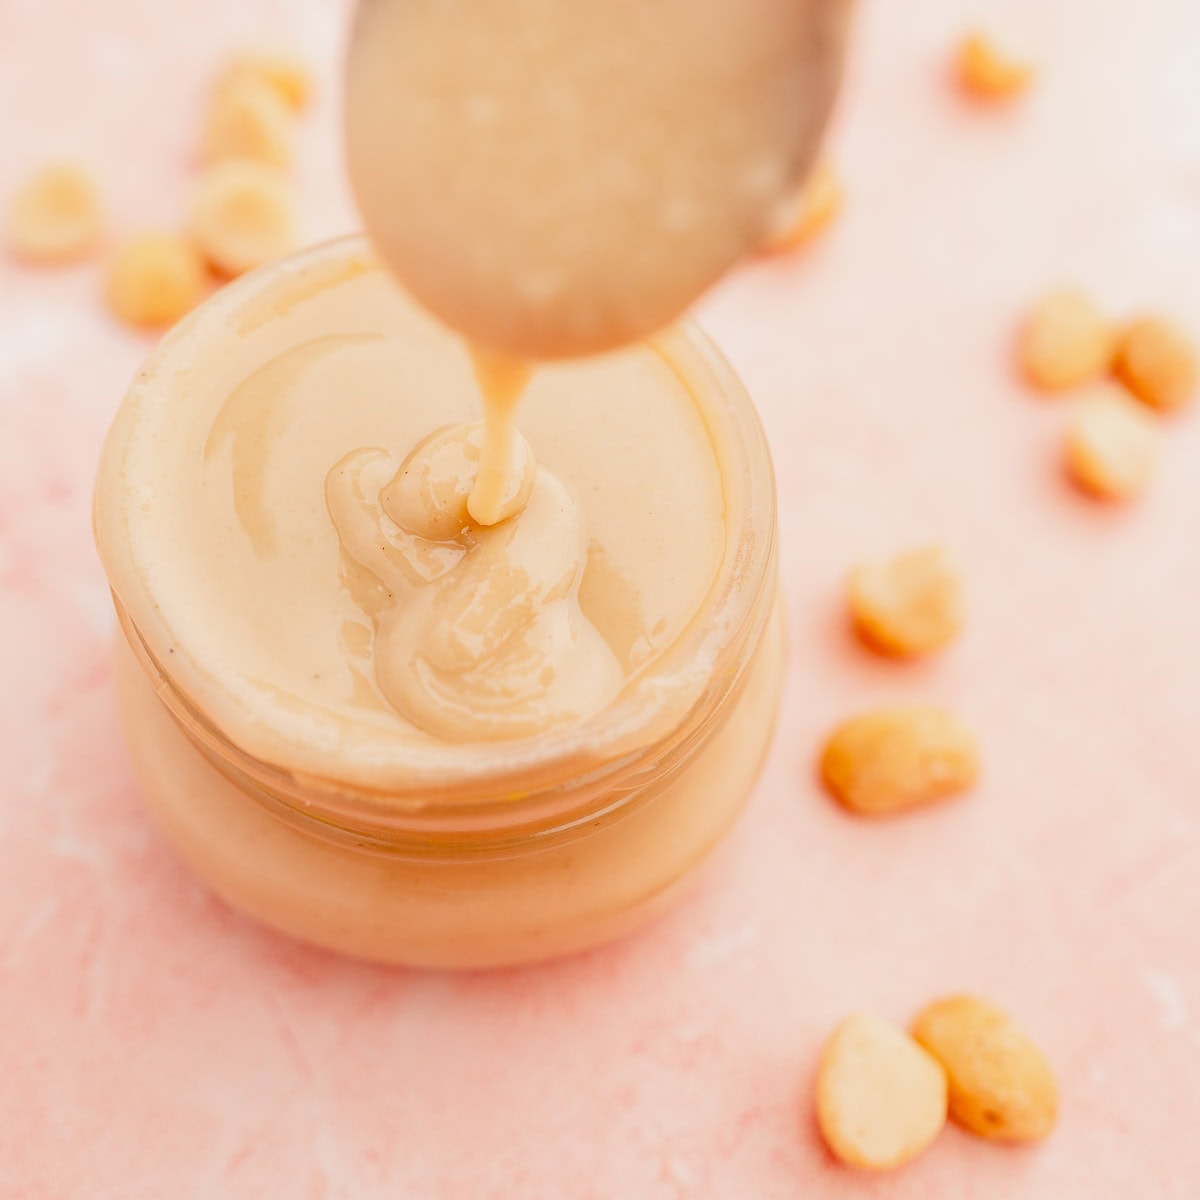 A spoon driops creamy macadamia nut butter into a glass jar on a pink surface, surrounded by scattered peanuts.